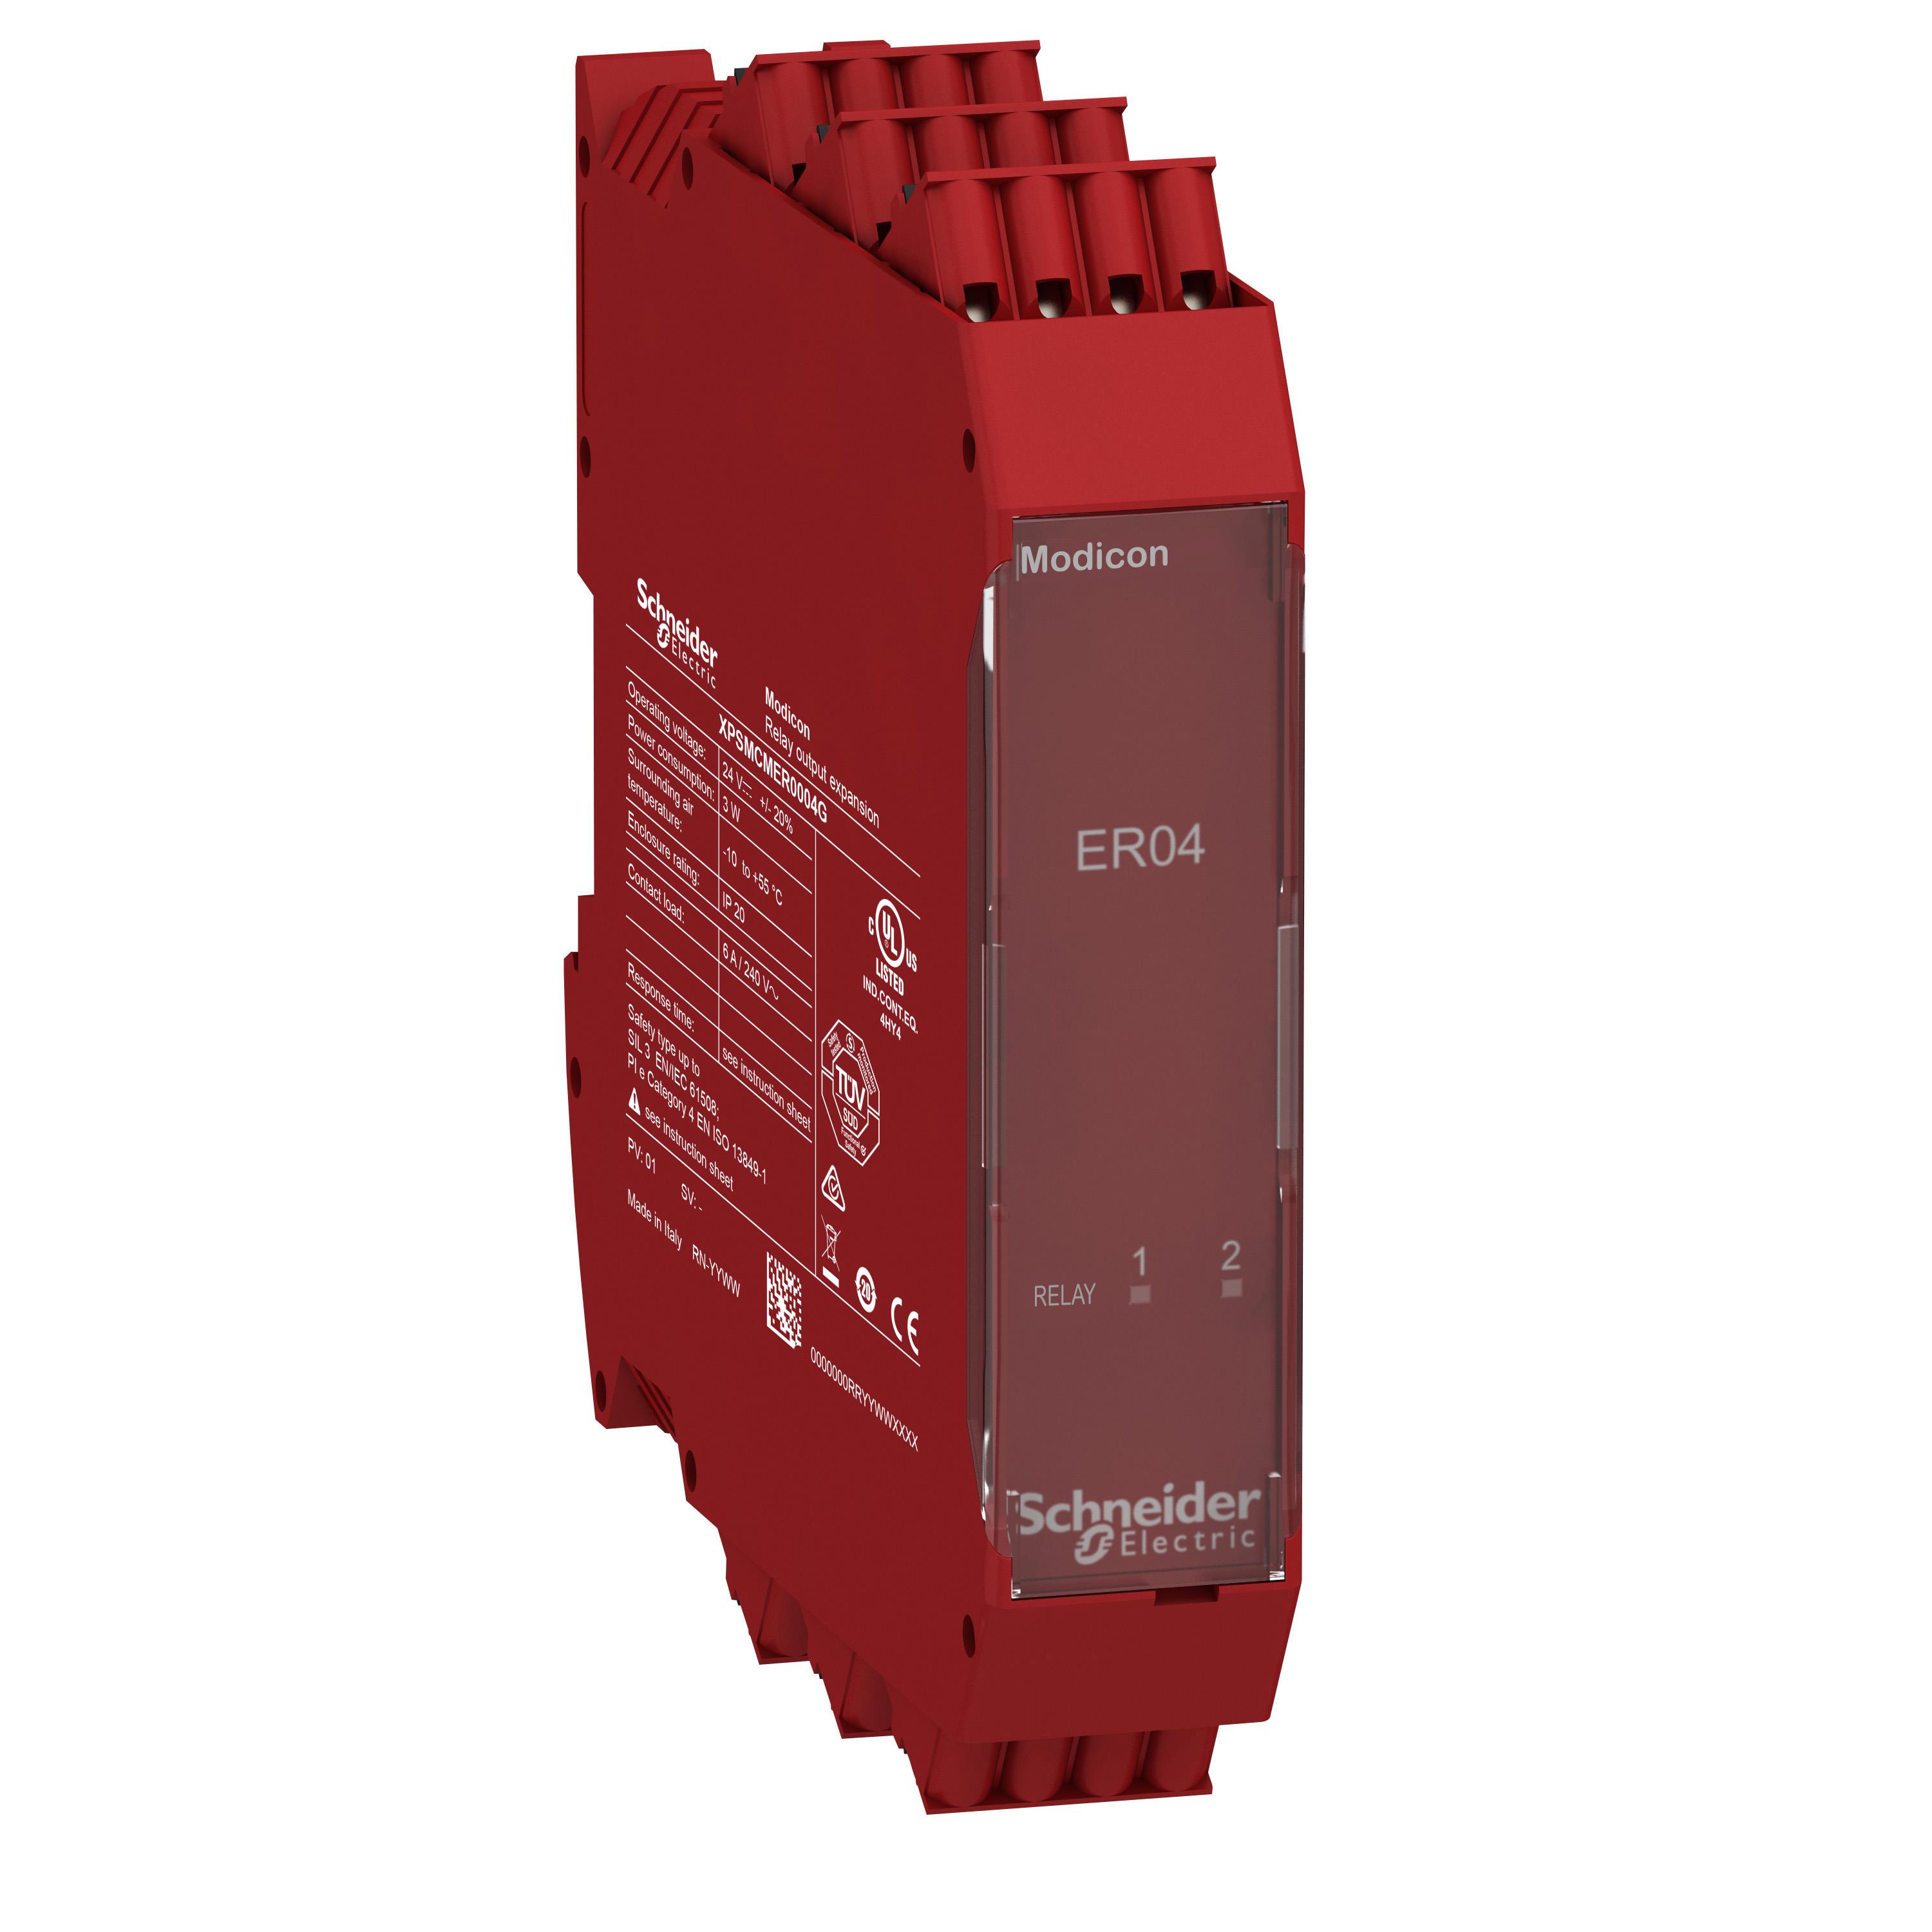 【XPSMCMER0004G】4 SAFETY RELAYS UNIT 4NO+2NC SPR